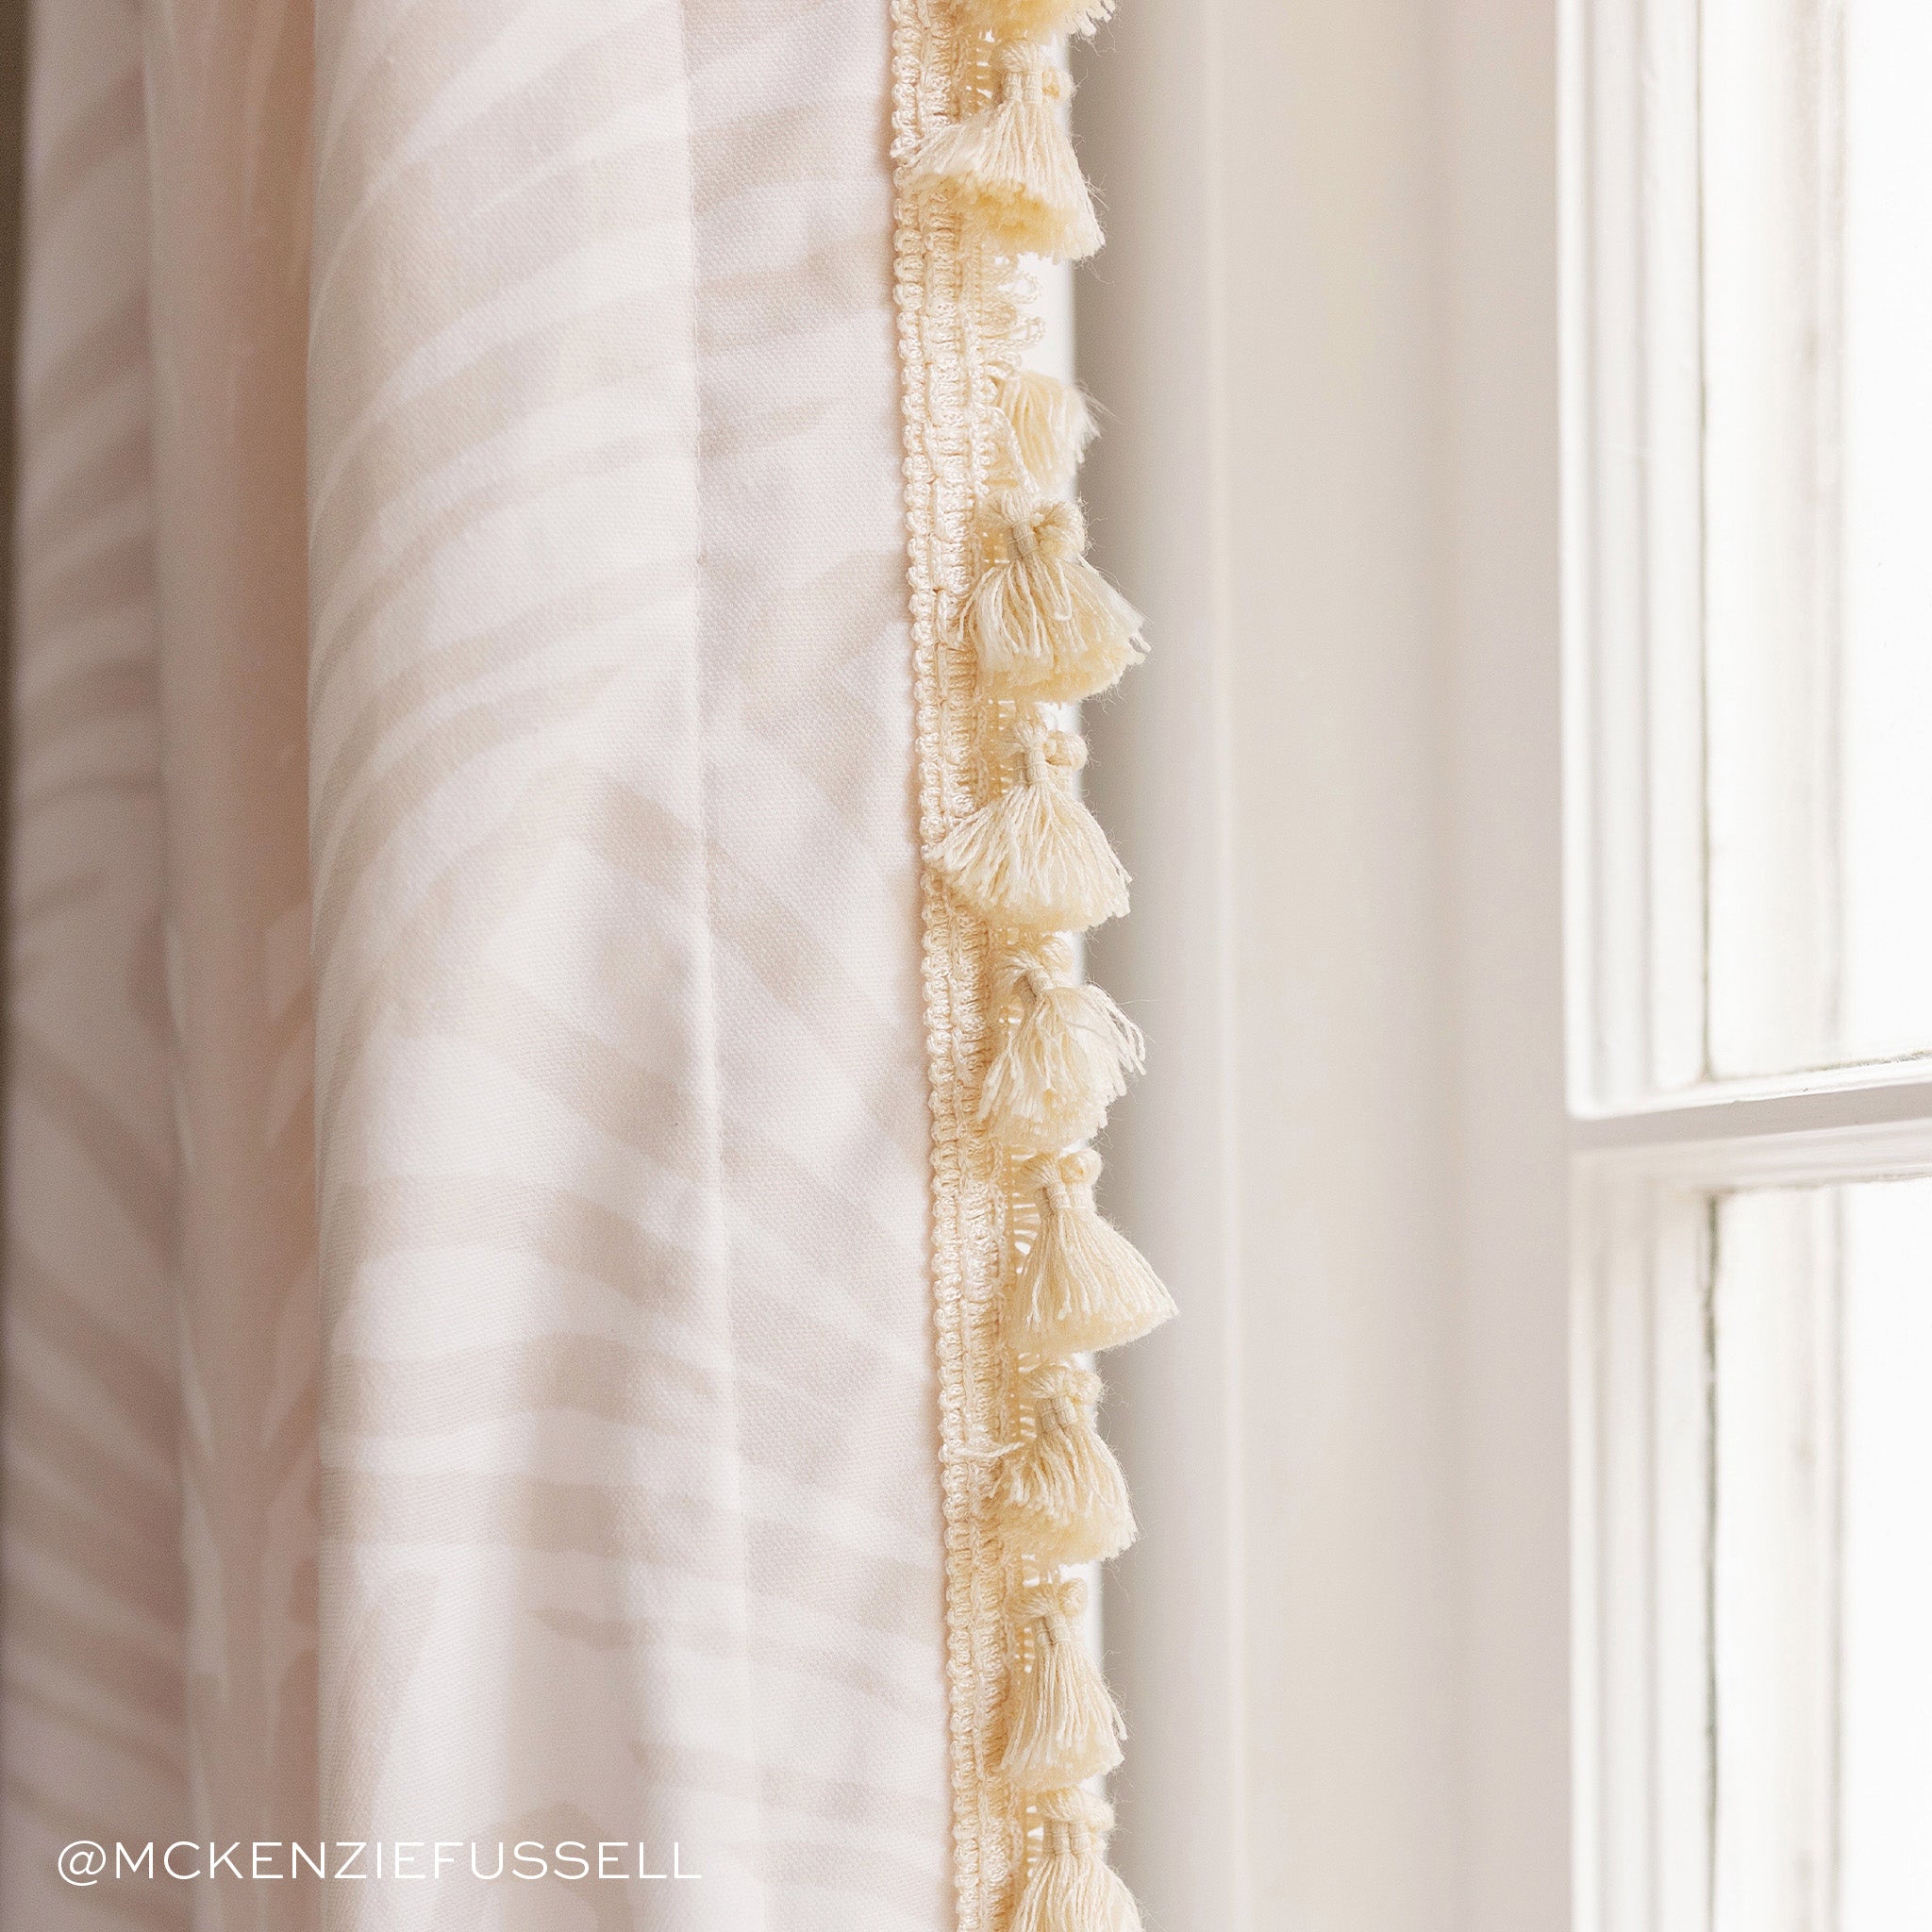 Close-up of Beige Palm Printed Curtain with cream tassel. Photo taken by Mckenzie Fussell